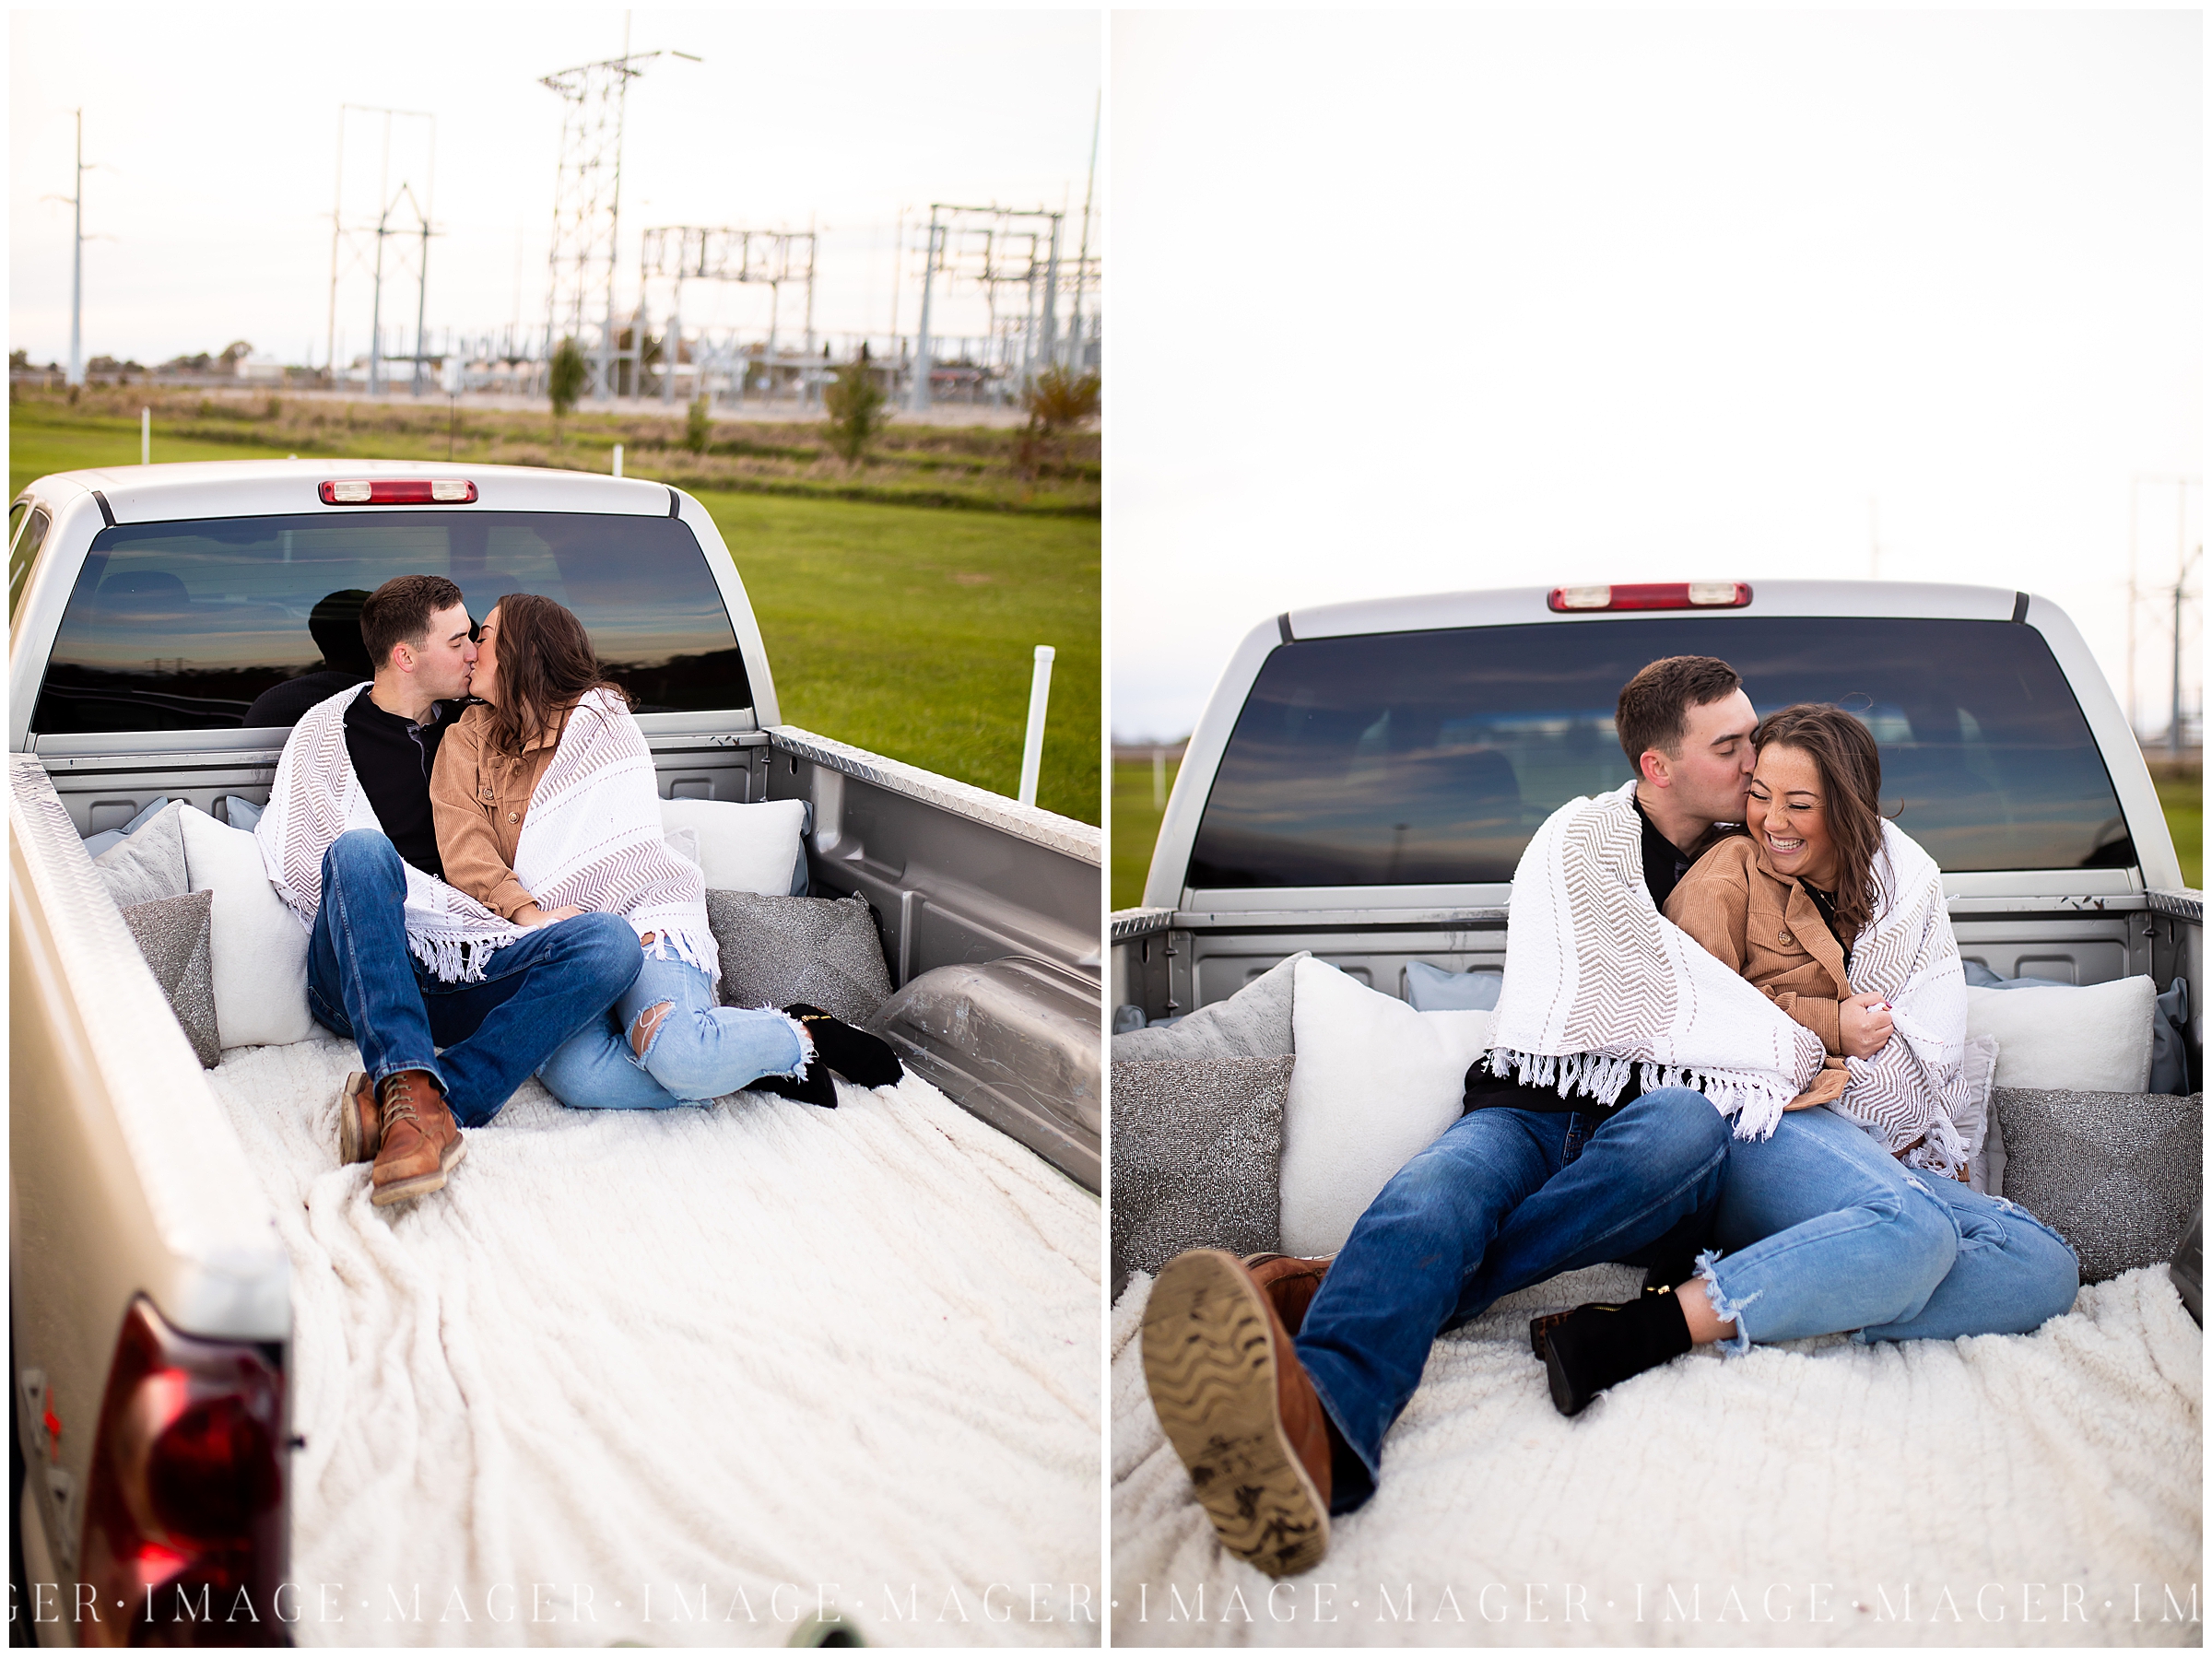 drive in movie themed session couple jeans fall truck pillows